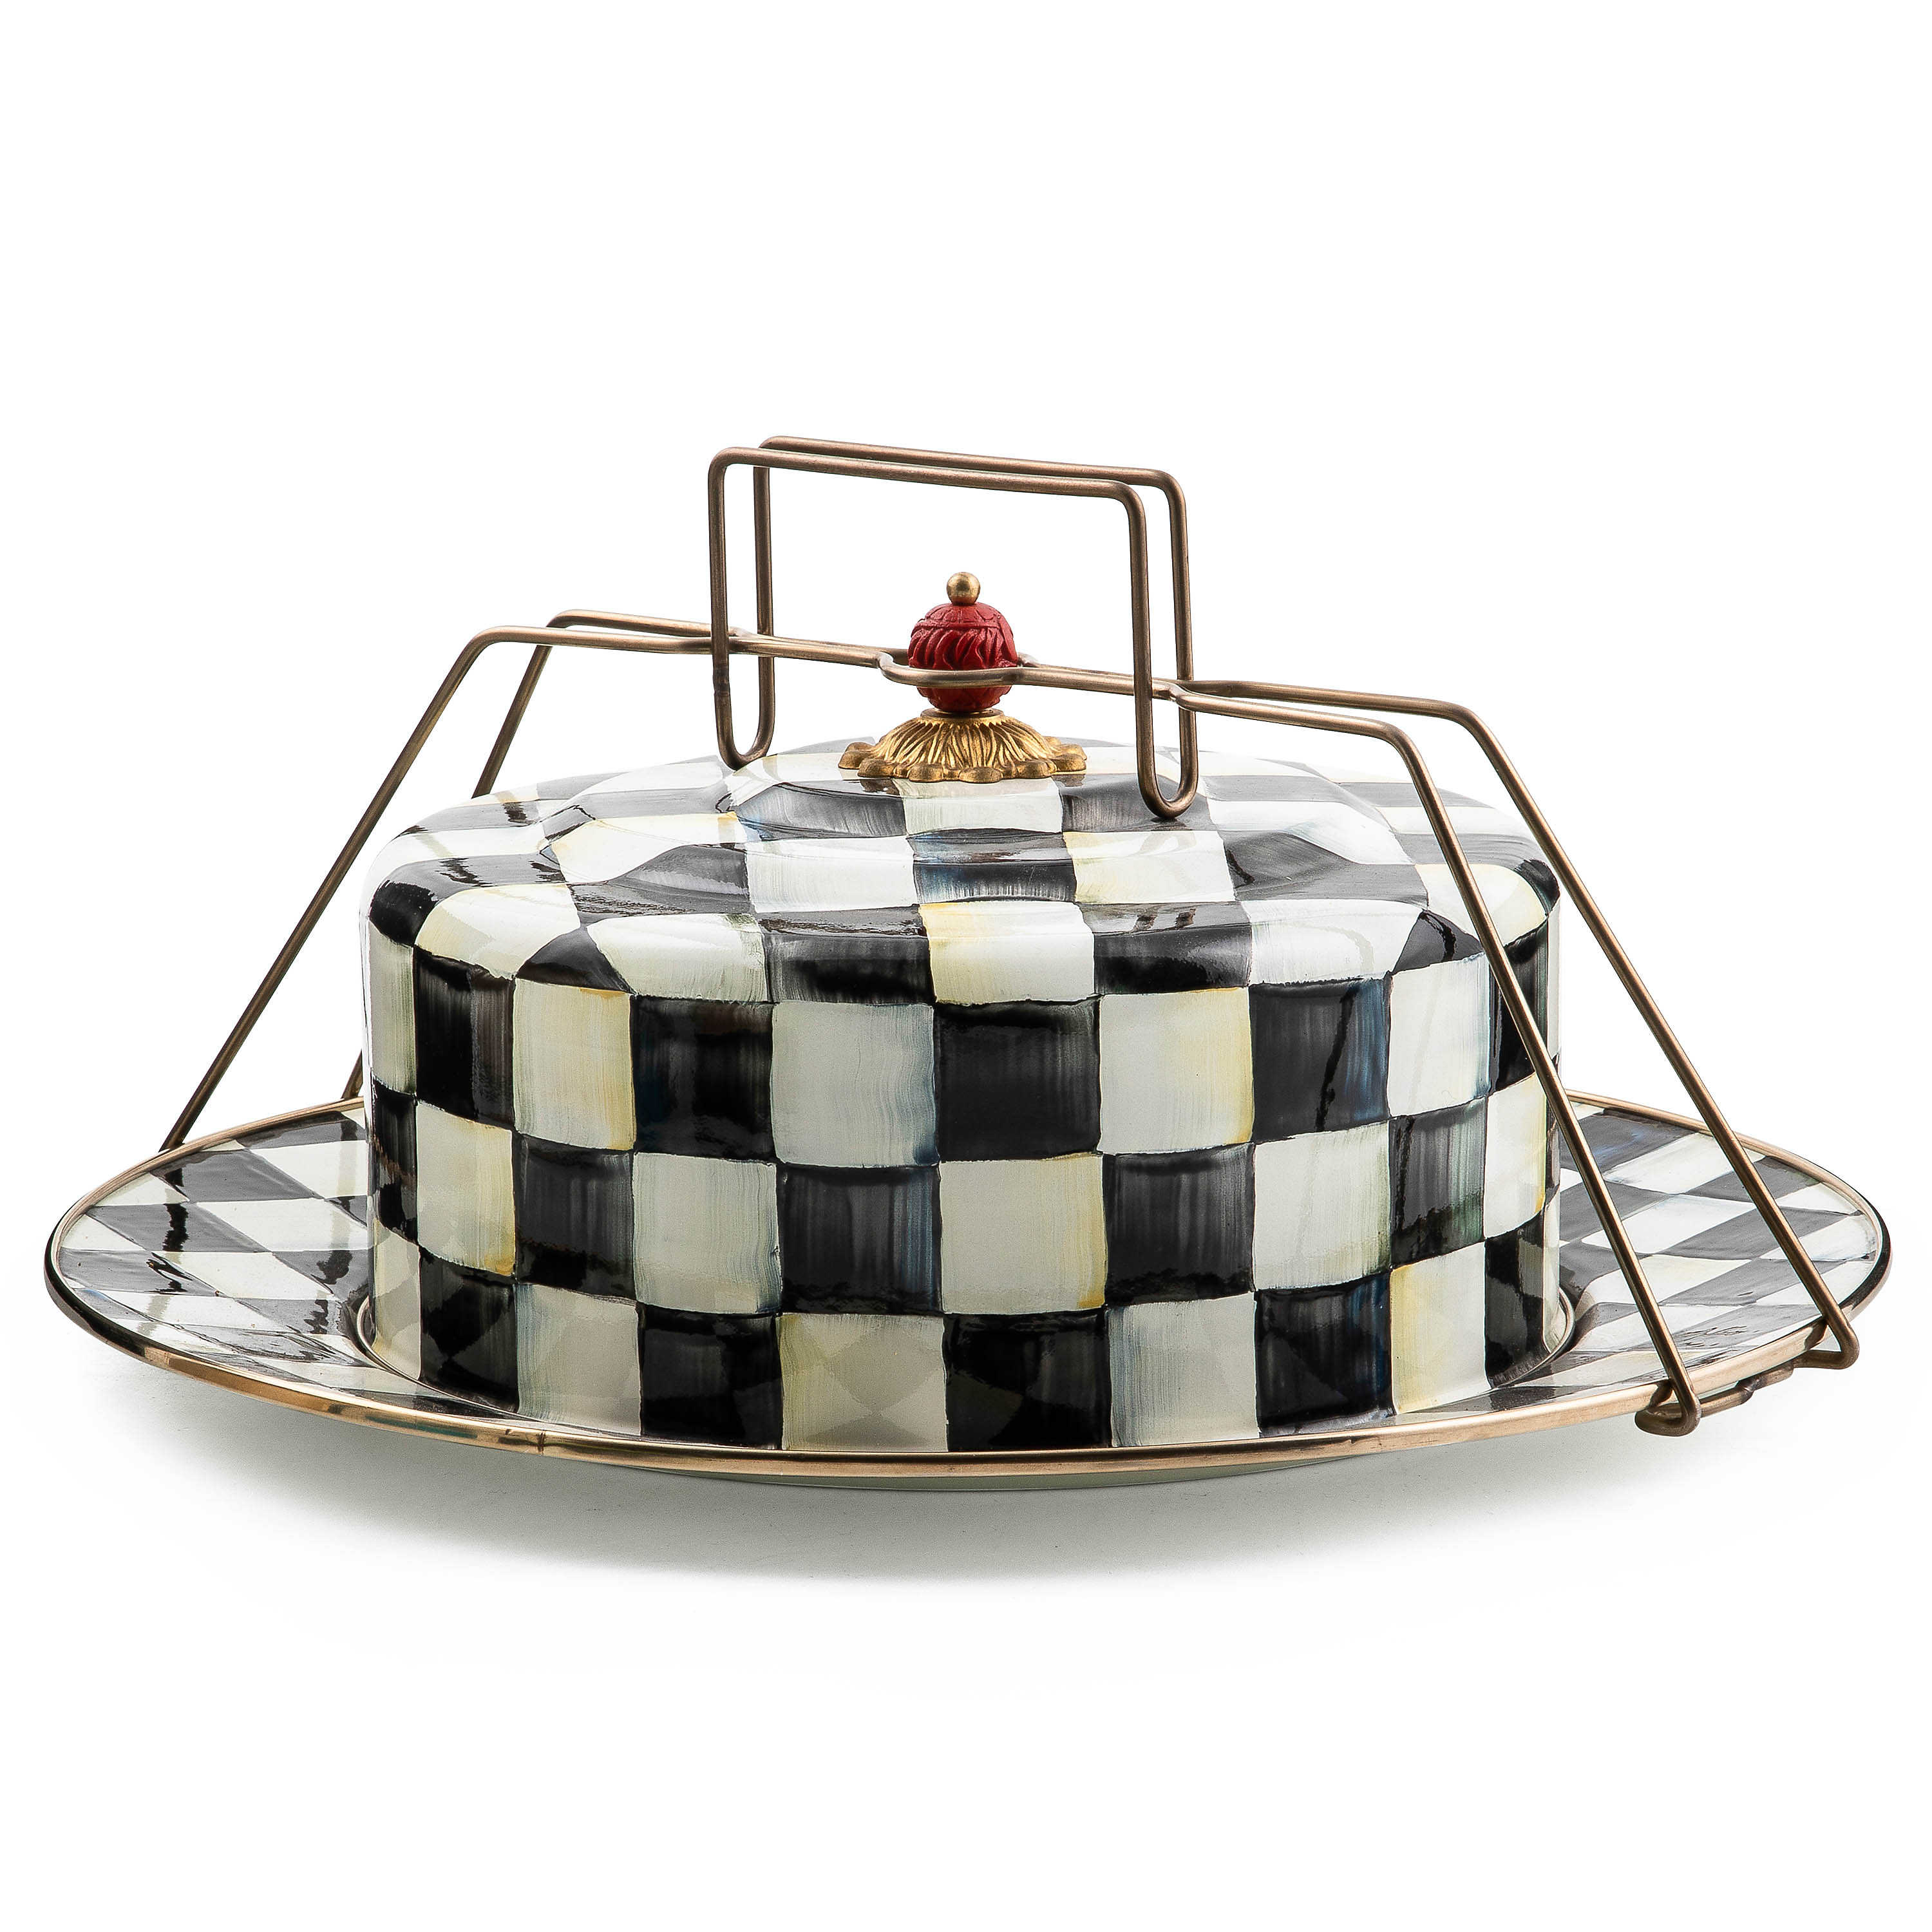 Courtly Check Cake Carrier mackenzie-childs Panama 0